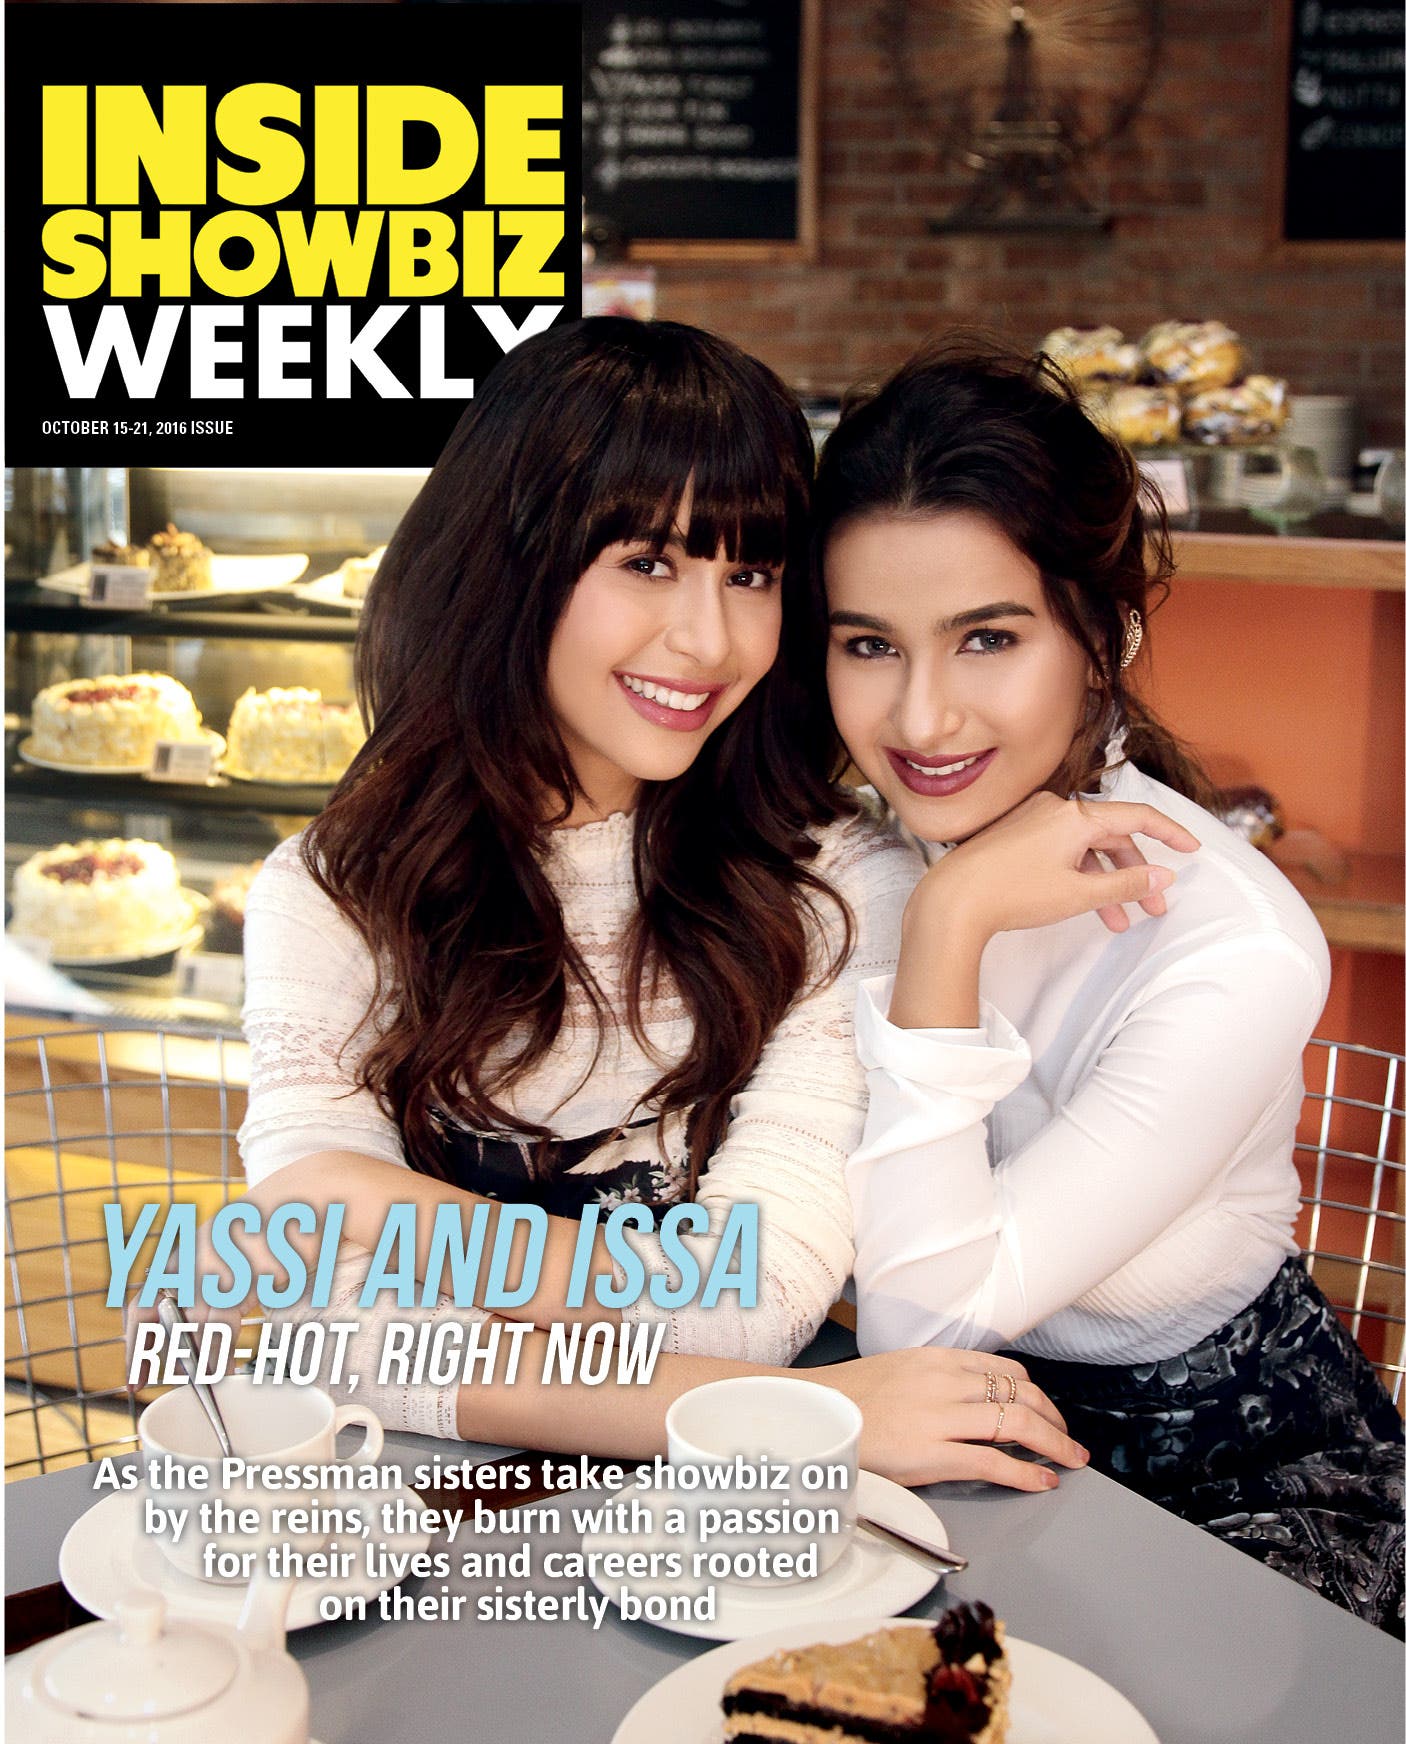 Yassi and Issa Pressman on the Cover of Inside Showbiz Weekly ⋆ Starmometer